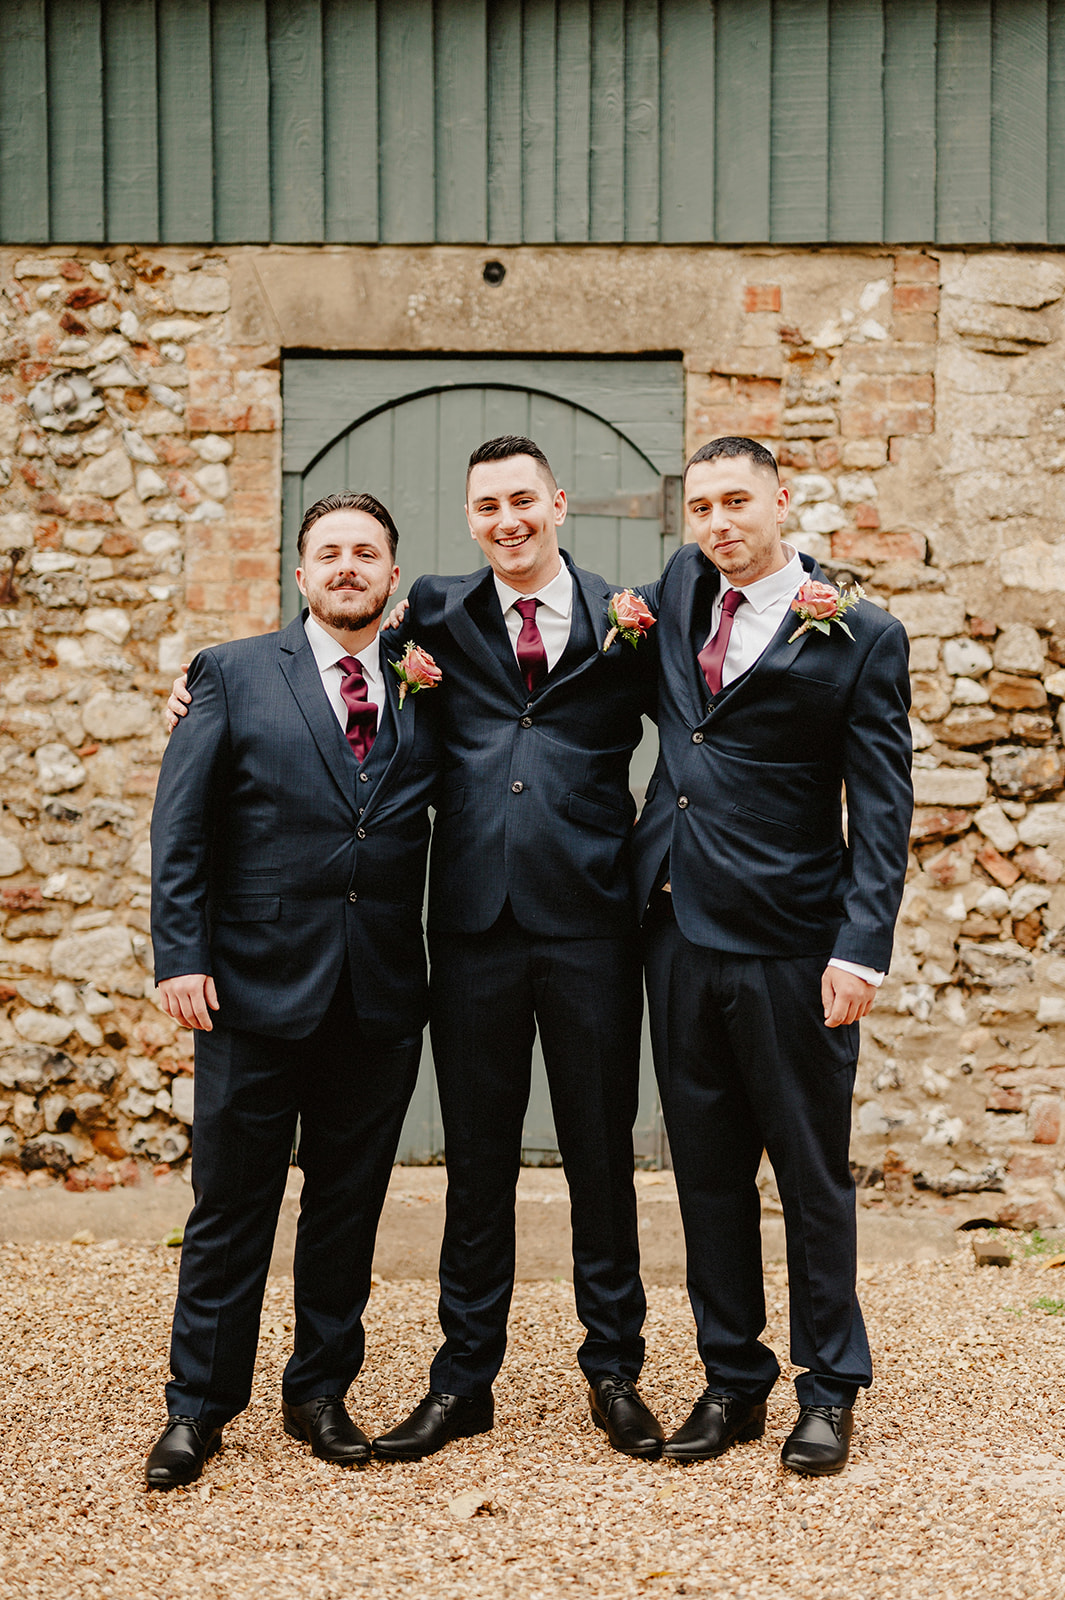 The groomsmen pose for a formal relaxed photo during a pentney abbey wedding